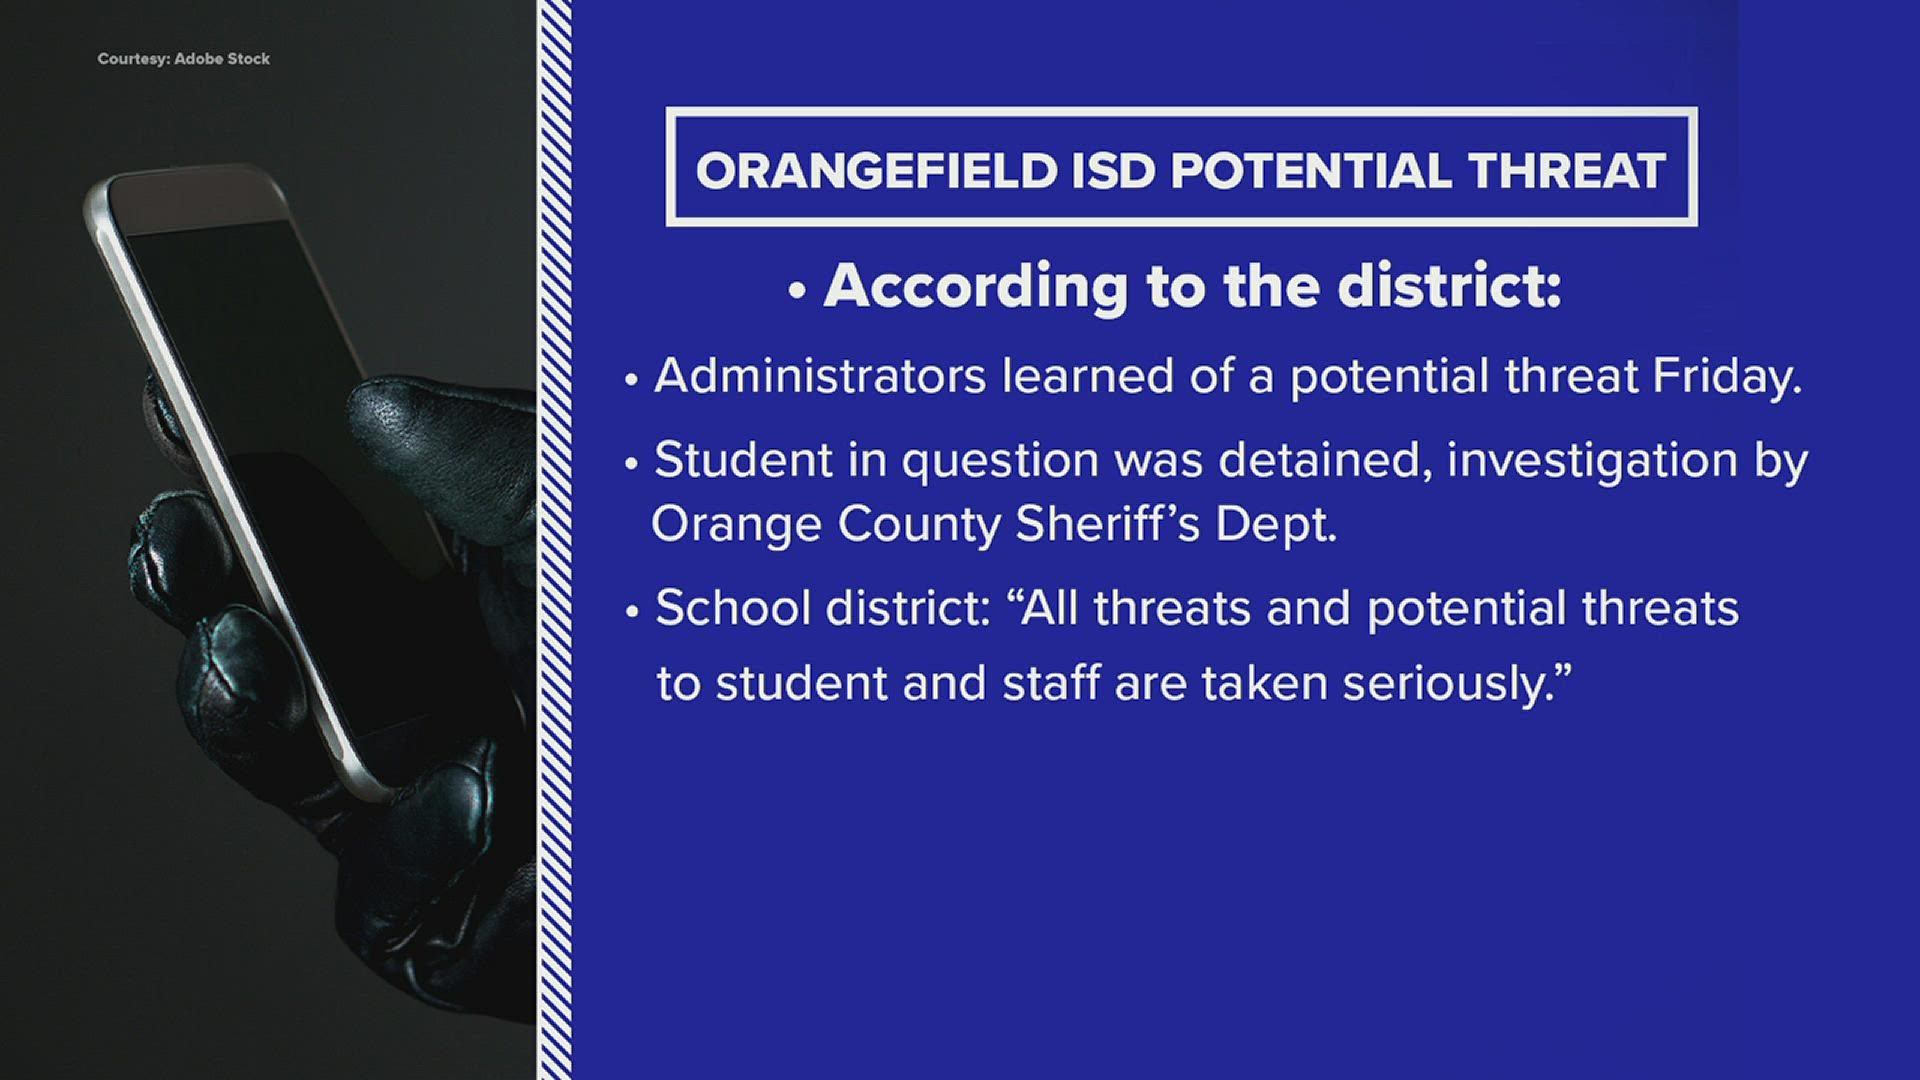 The district says it called the Orange County Sheriff’s Office to investigate, and a student was detained.